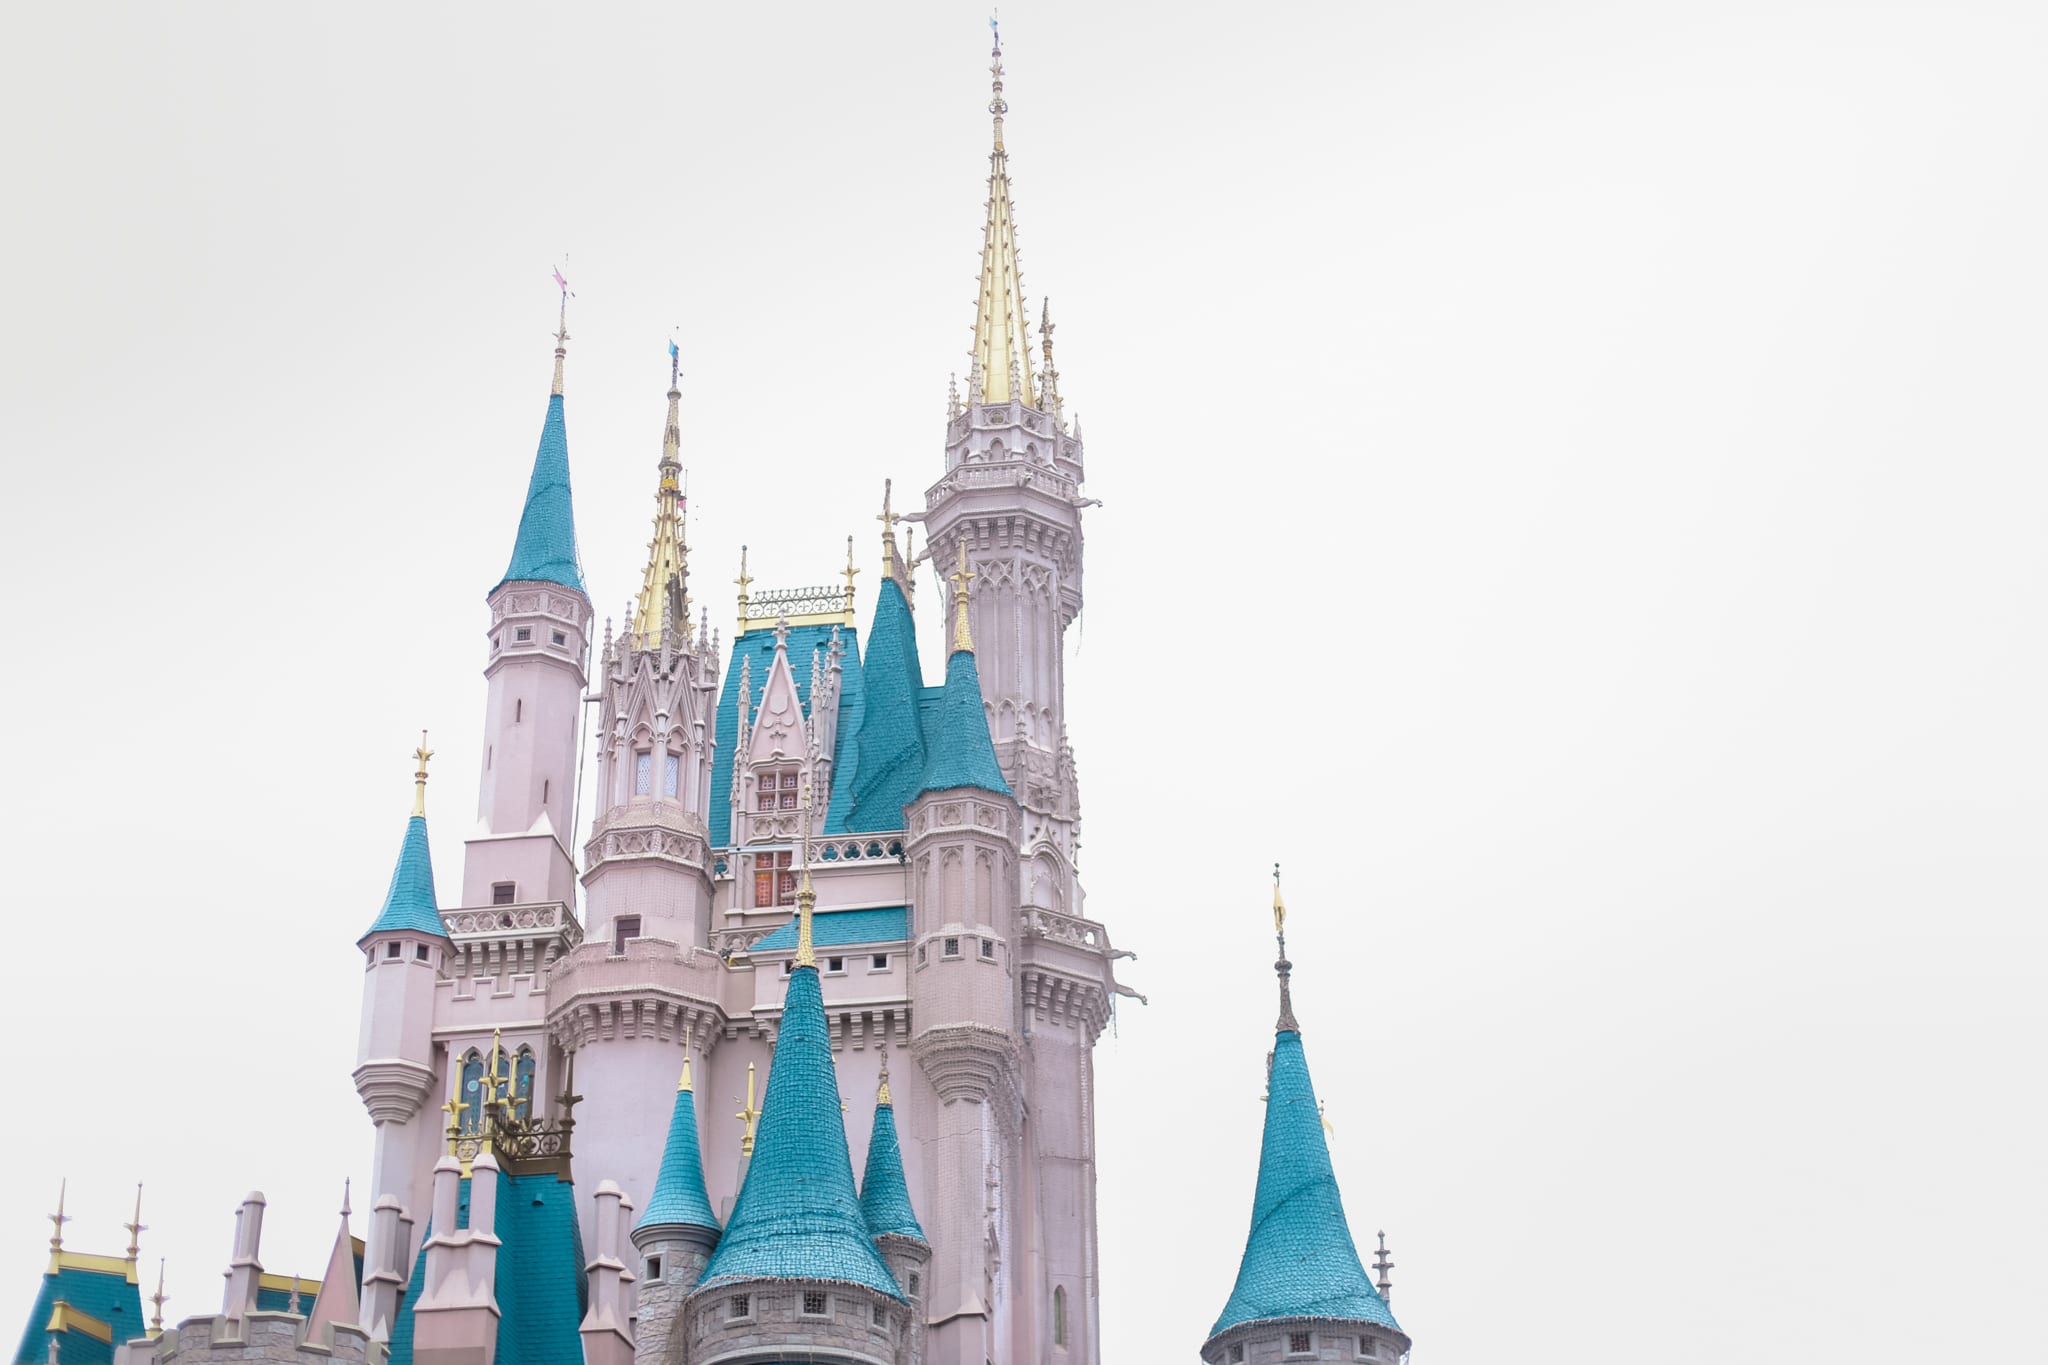 Helena Woods Travel Guide to Walt Disney World Magic Kingdom 2018 Dining, Shows, Attractions for Adults Couples